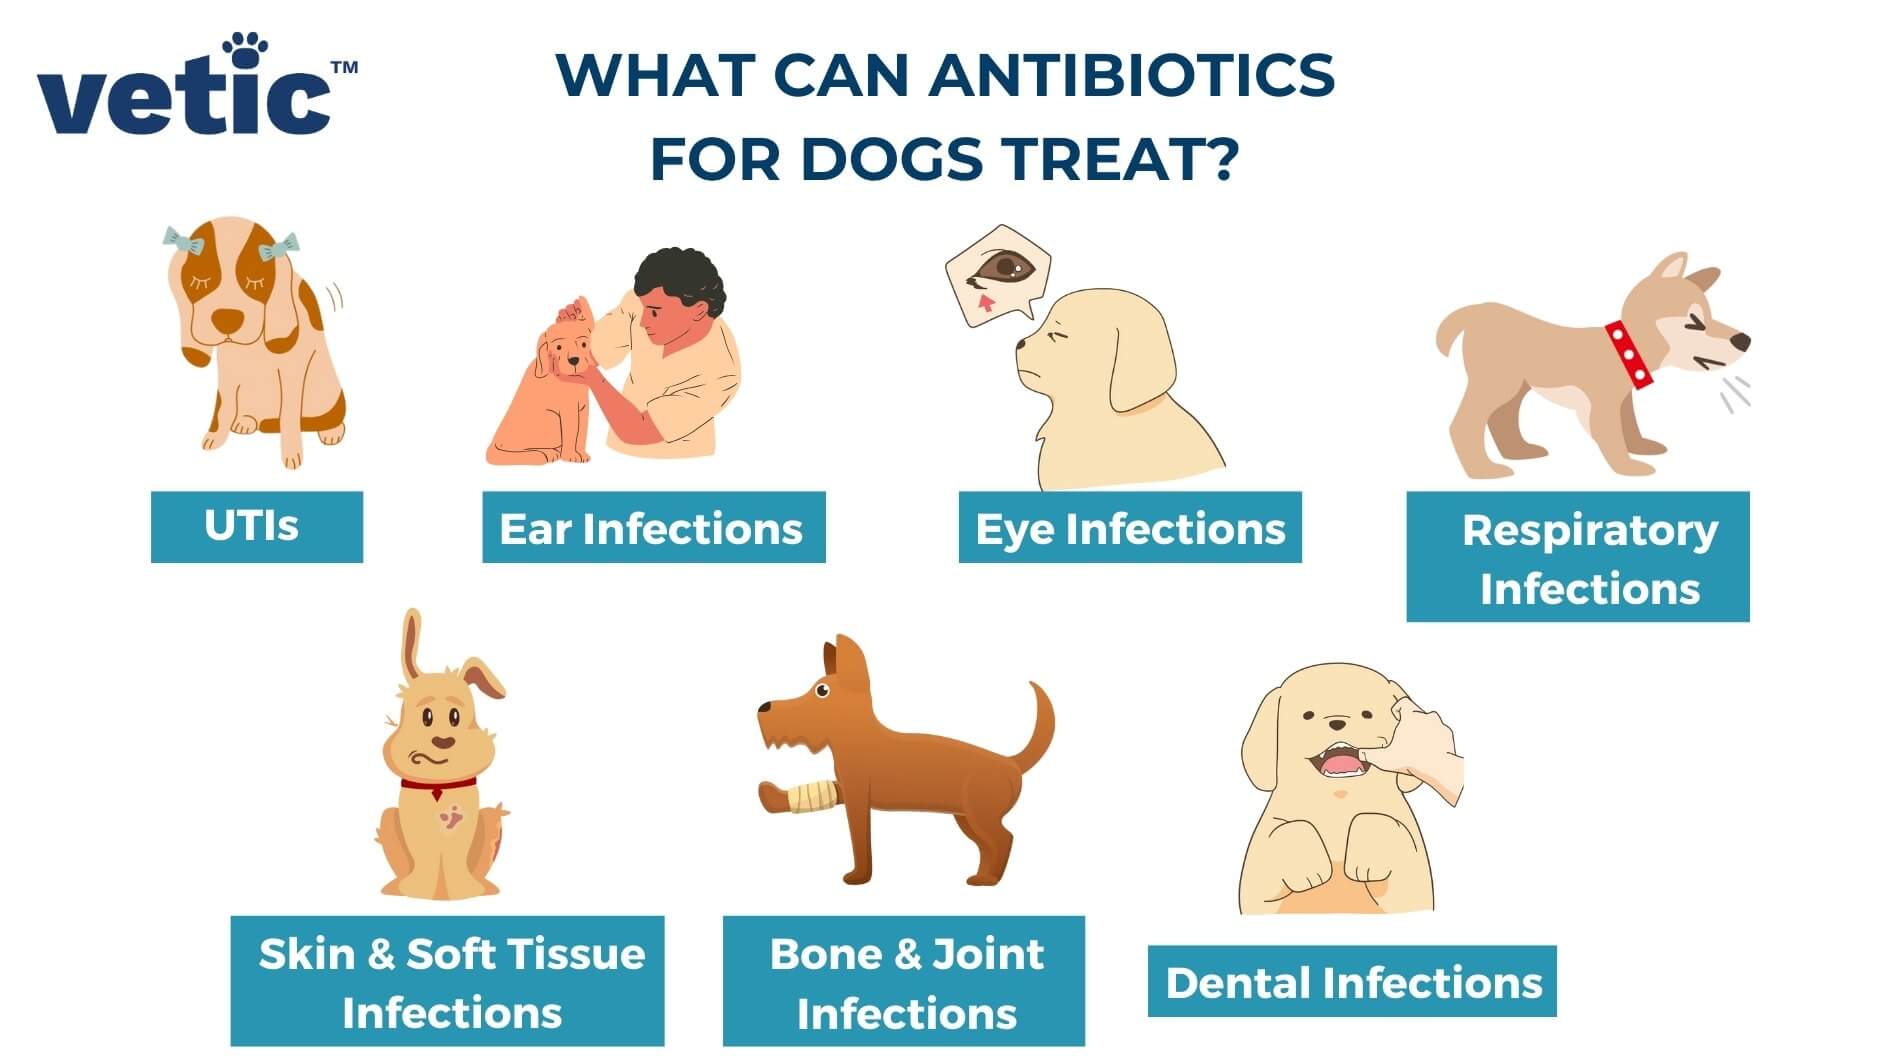 Infographic on What Can Antibiotics for Dogs Treat? UTIs Ear Infections Eye Infections Respiratory Infections Skin & Soft Tissue Infections Bone & Joint Infections Dental Infections